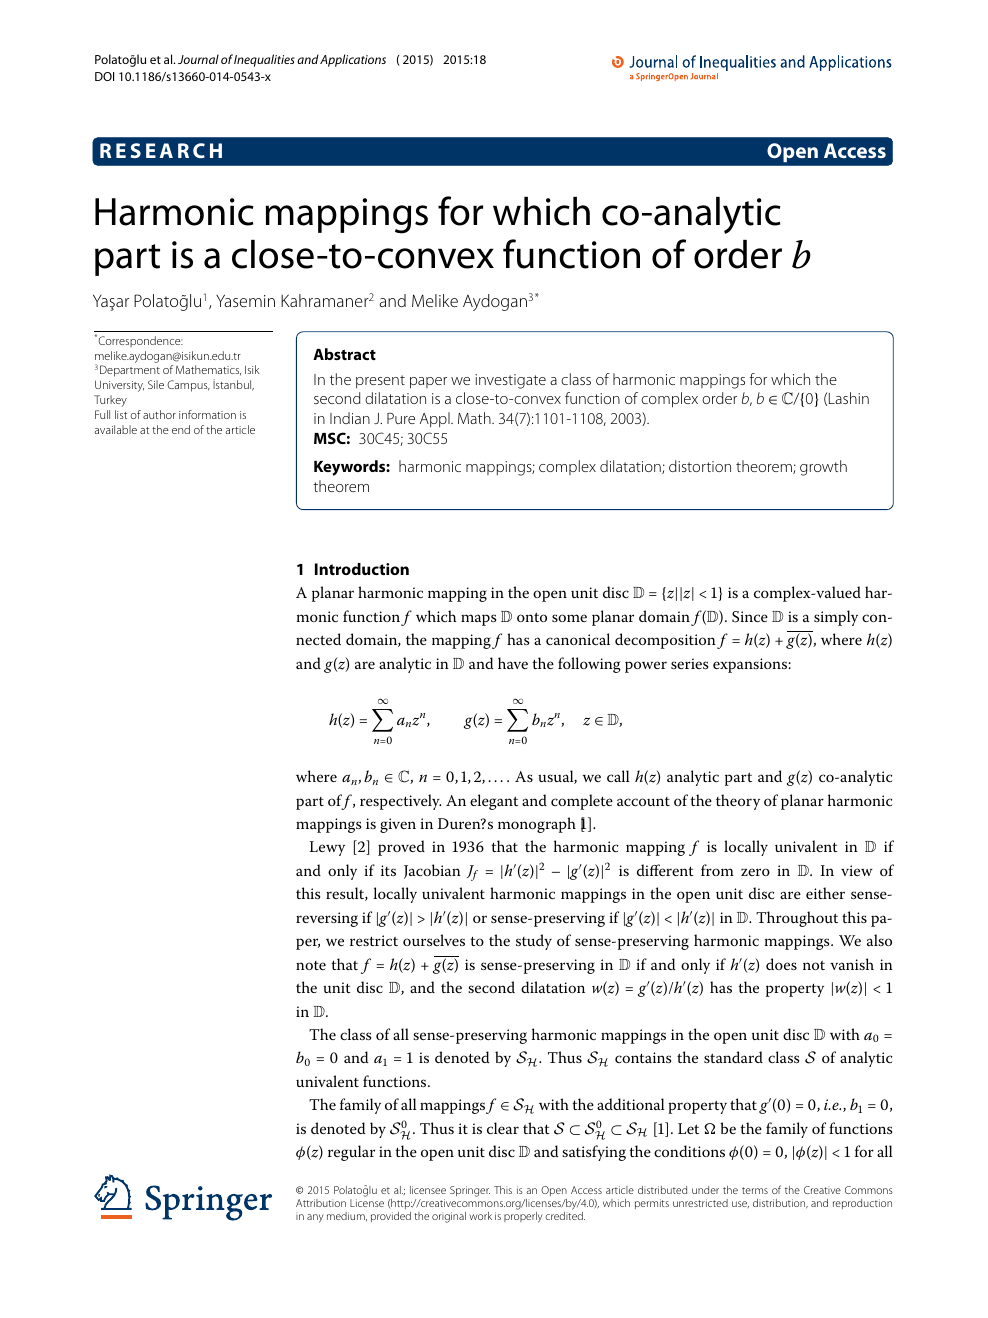 Harmonic Mappings For Which Co Analytic Part Is A Close To Convex Function Of Order B Topic Of Research Paper In Mathematics Download Scholarly Article Pdf And Read For Free On Cyberleninka Open Science